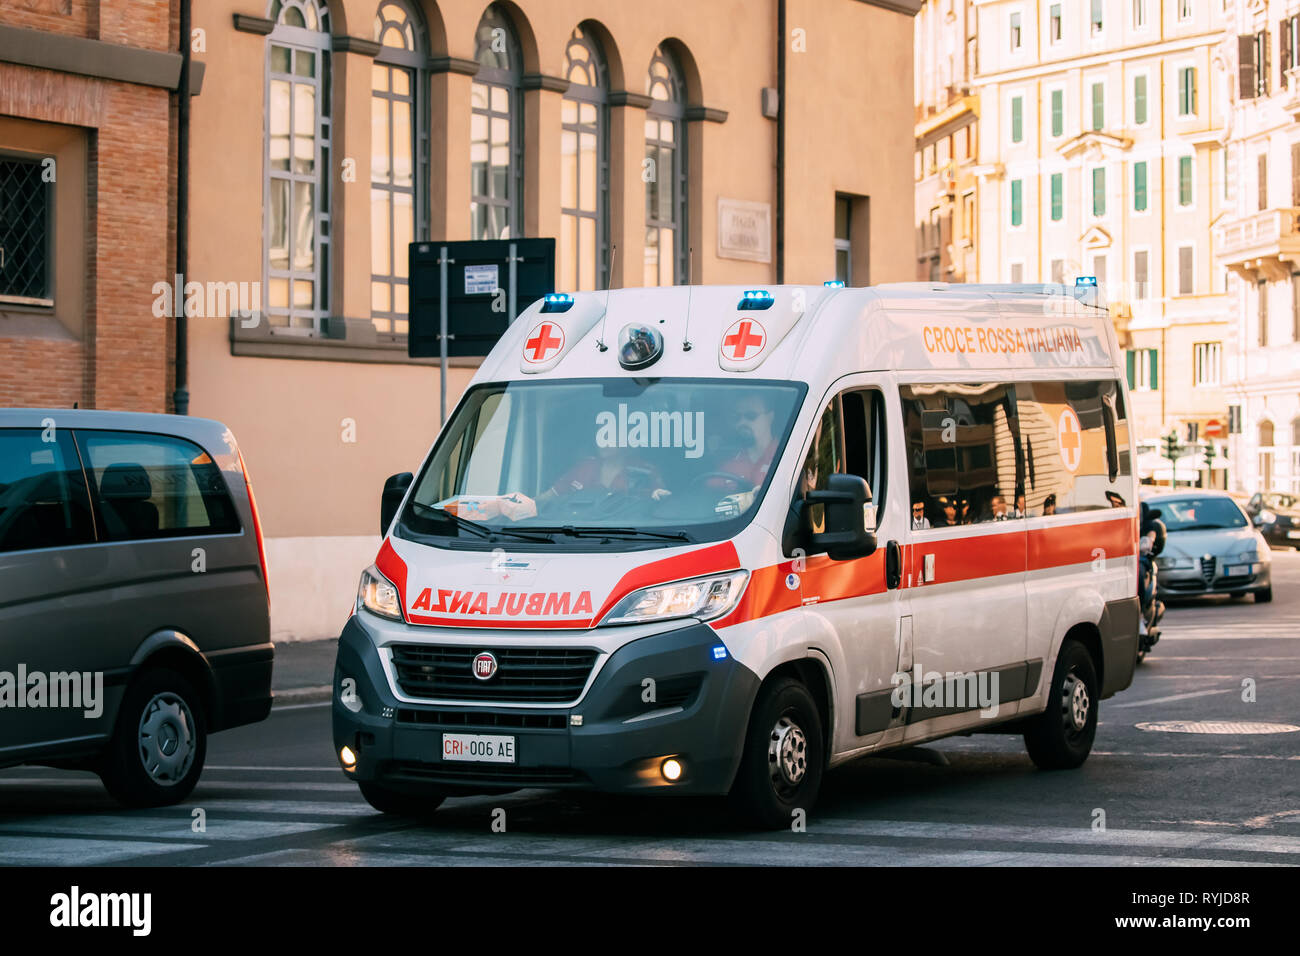 Rome, Italy - October 20, 2018: Moving With Siren Emergency Ambulance Reanimation Van Fiat Car On Street. Emergency Lights System Els Activated Stock Photo